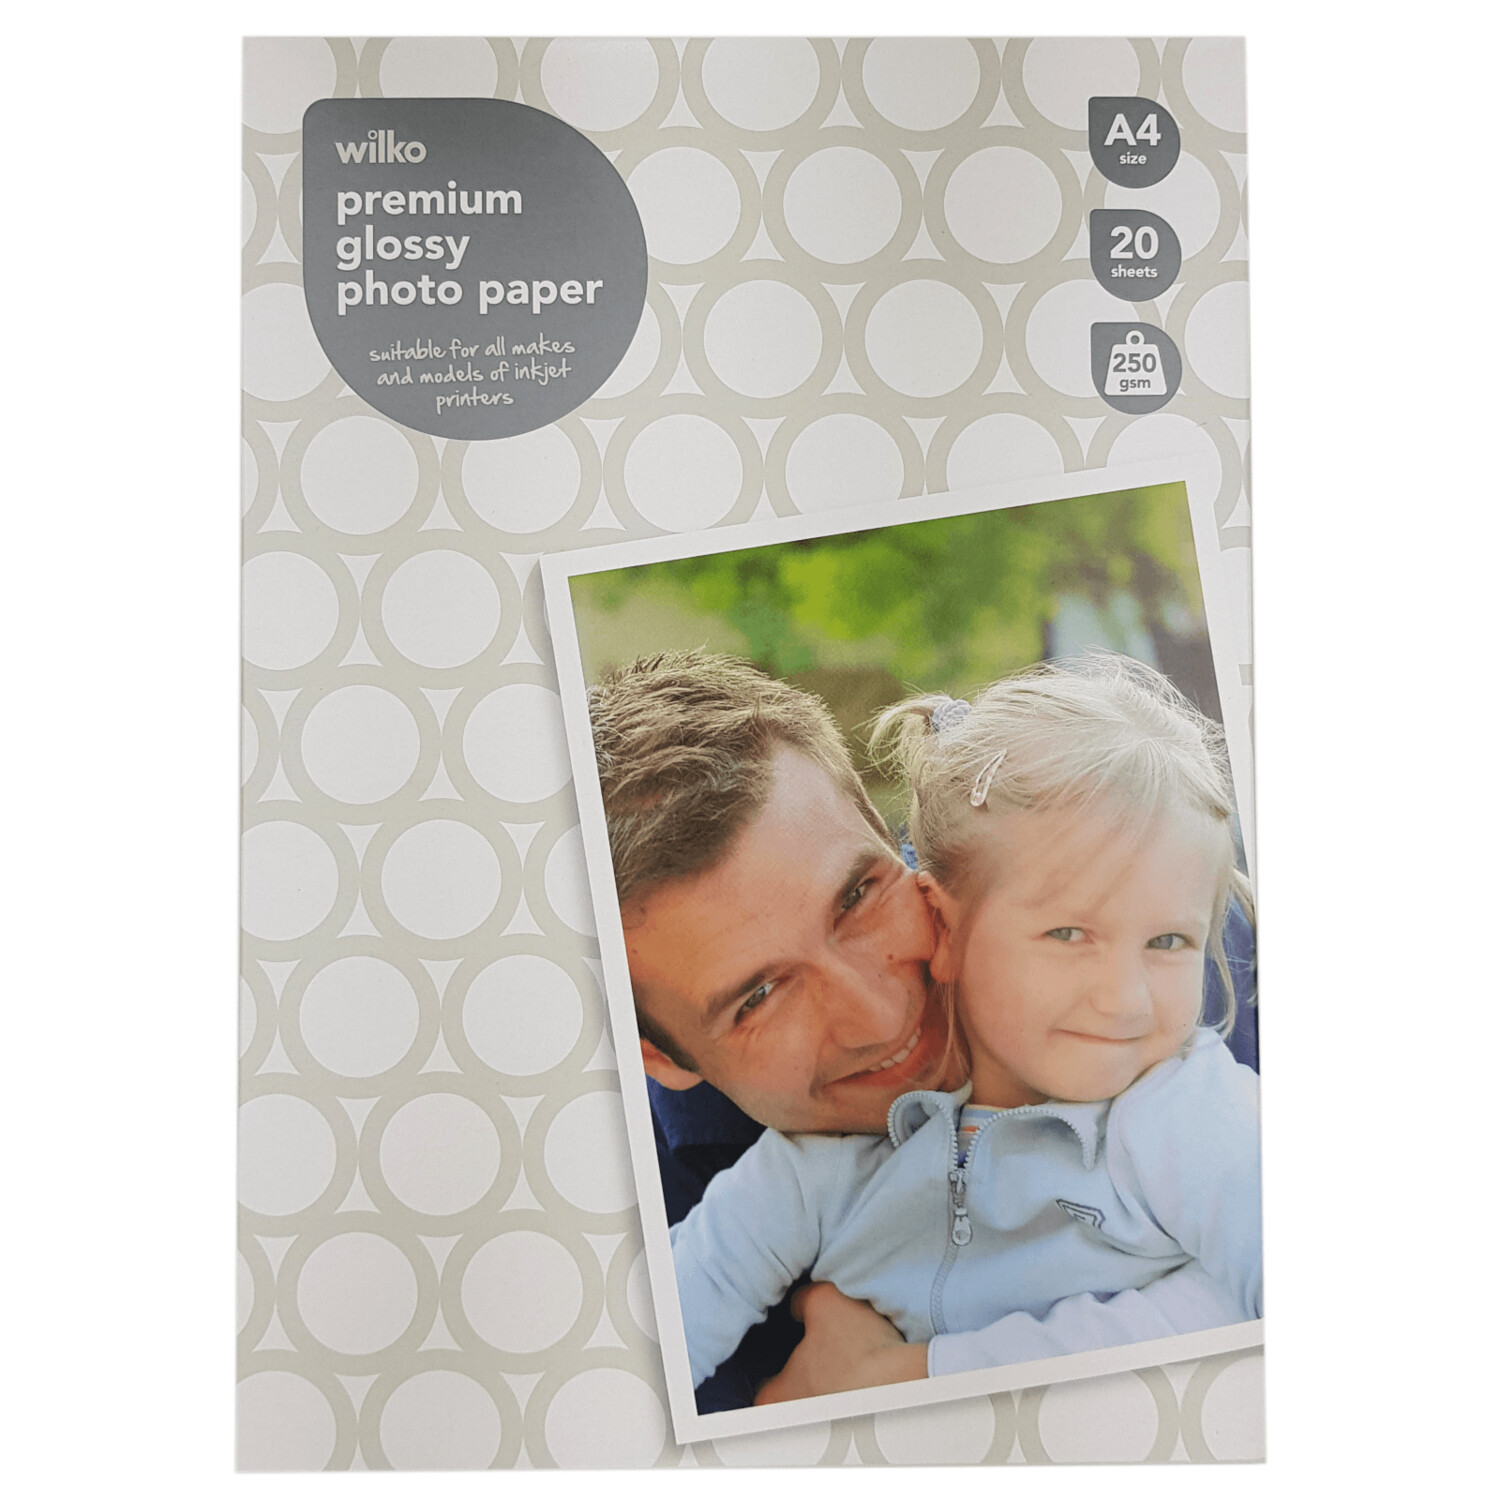 7 x packs of Wilko Premium Glossy Photo Paper A4 - 20 Sheets per pack - 250gsm 